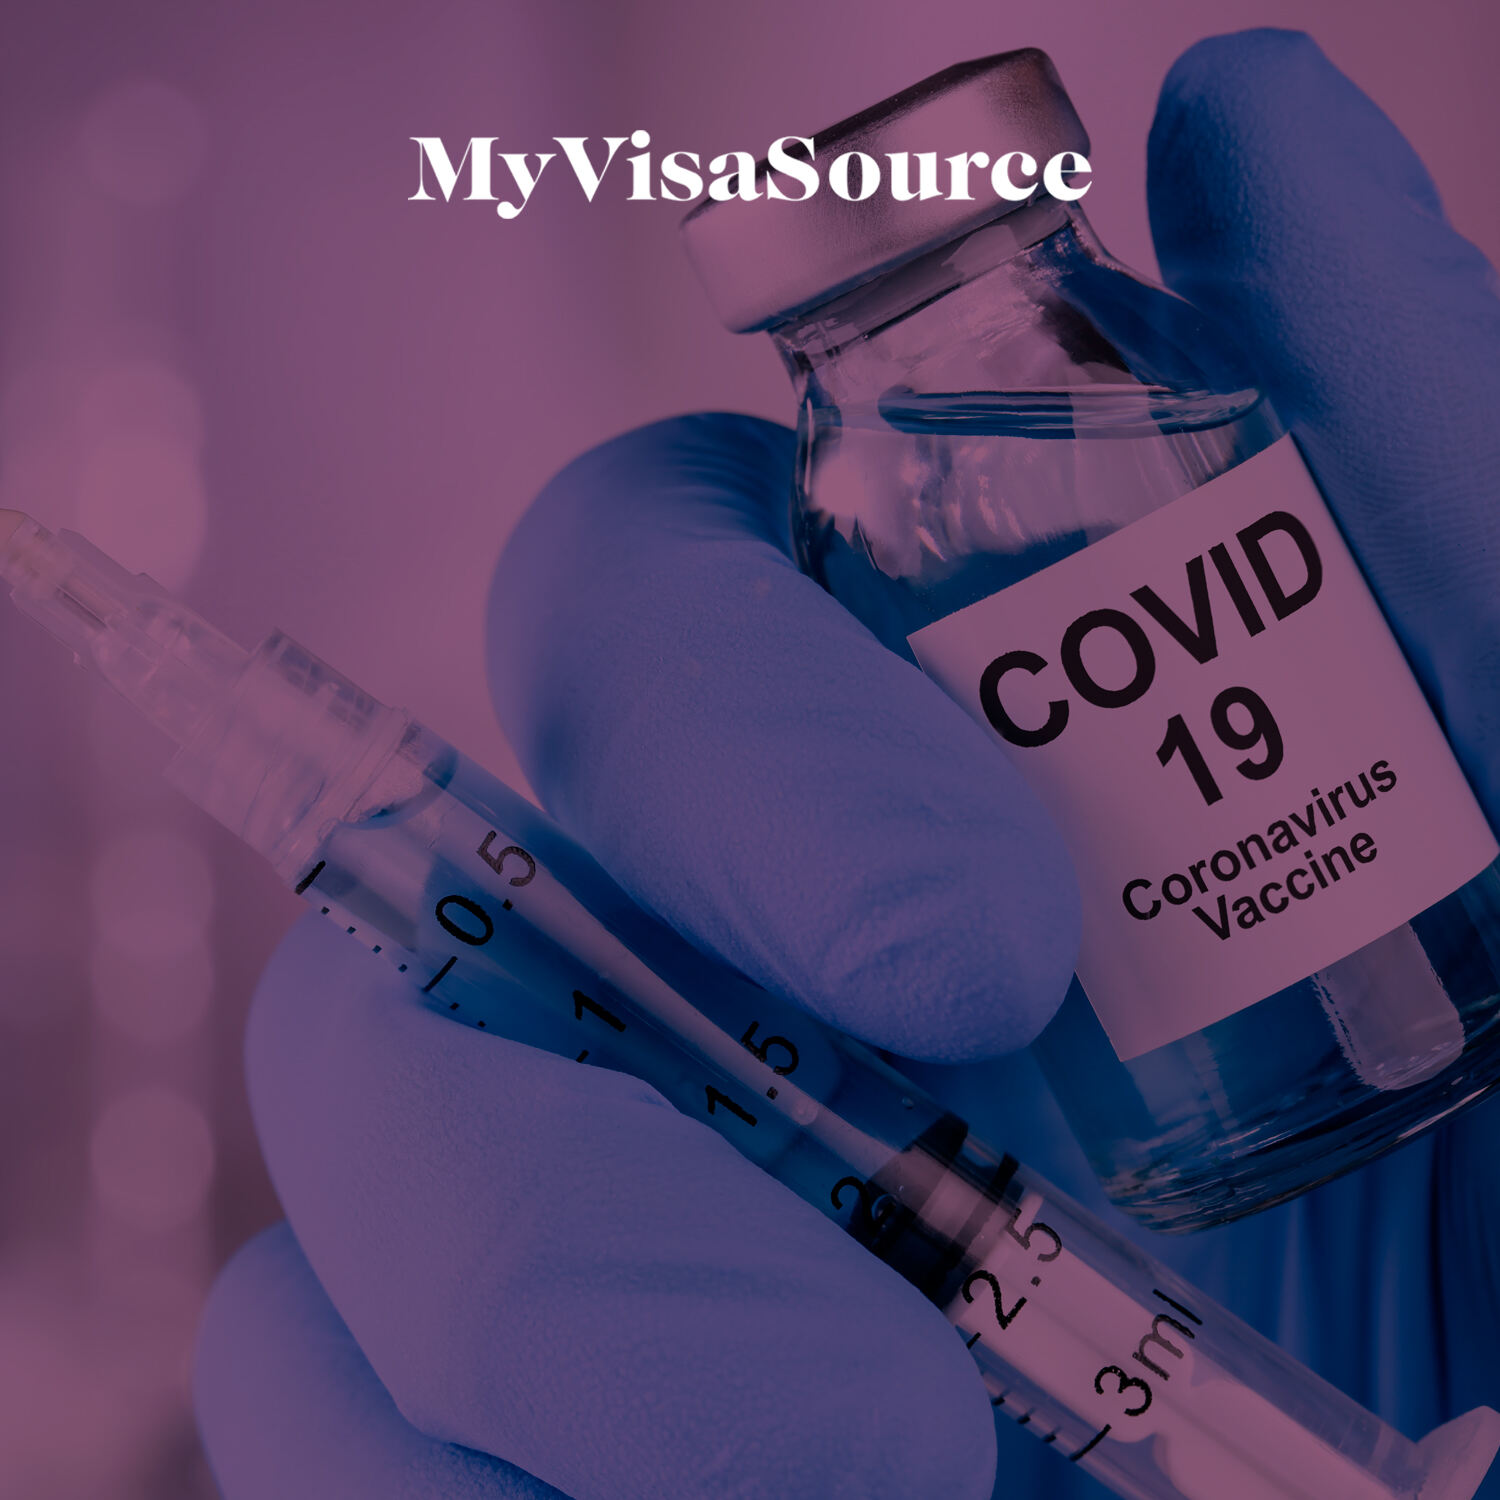 covid vaccine and syringe between rubber gloves my visa source